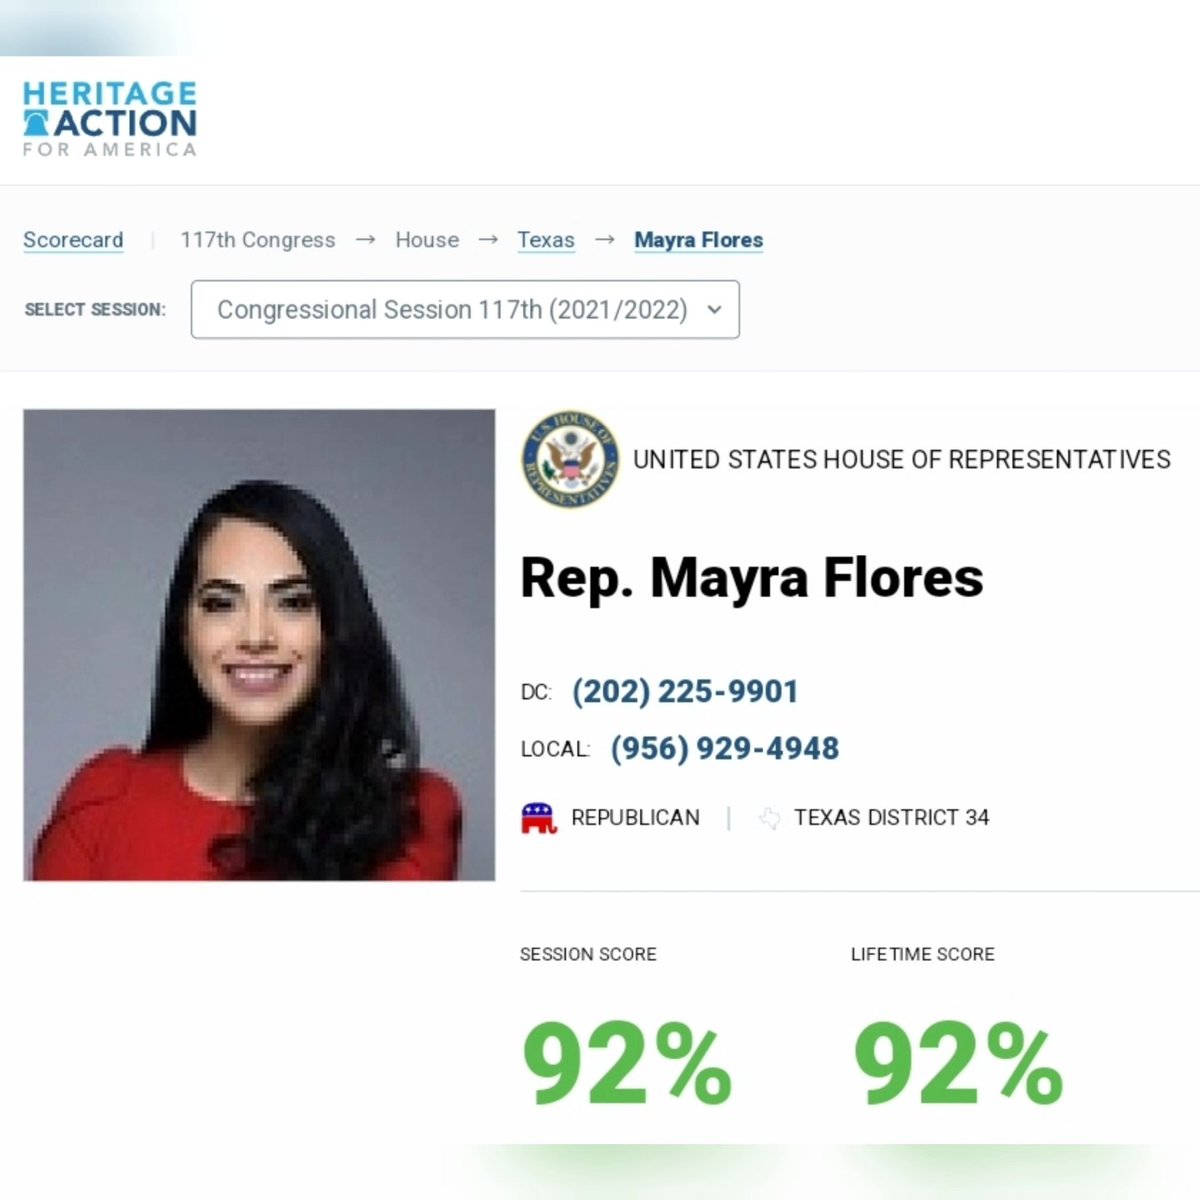 I proudly served South Texas in 2022 as the first Mexican-born Congresswoman in American history. I had an A+ voting record for key legislation against reckless spending, protected our 2nd Amendment rights against socialistic policies, and was a champion of economic freedom 🇺🇸